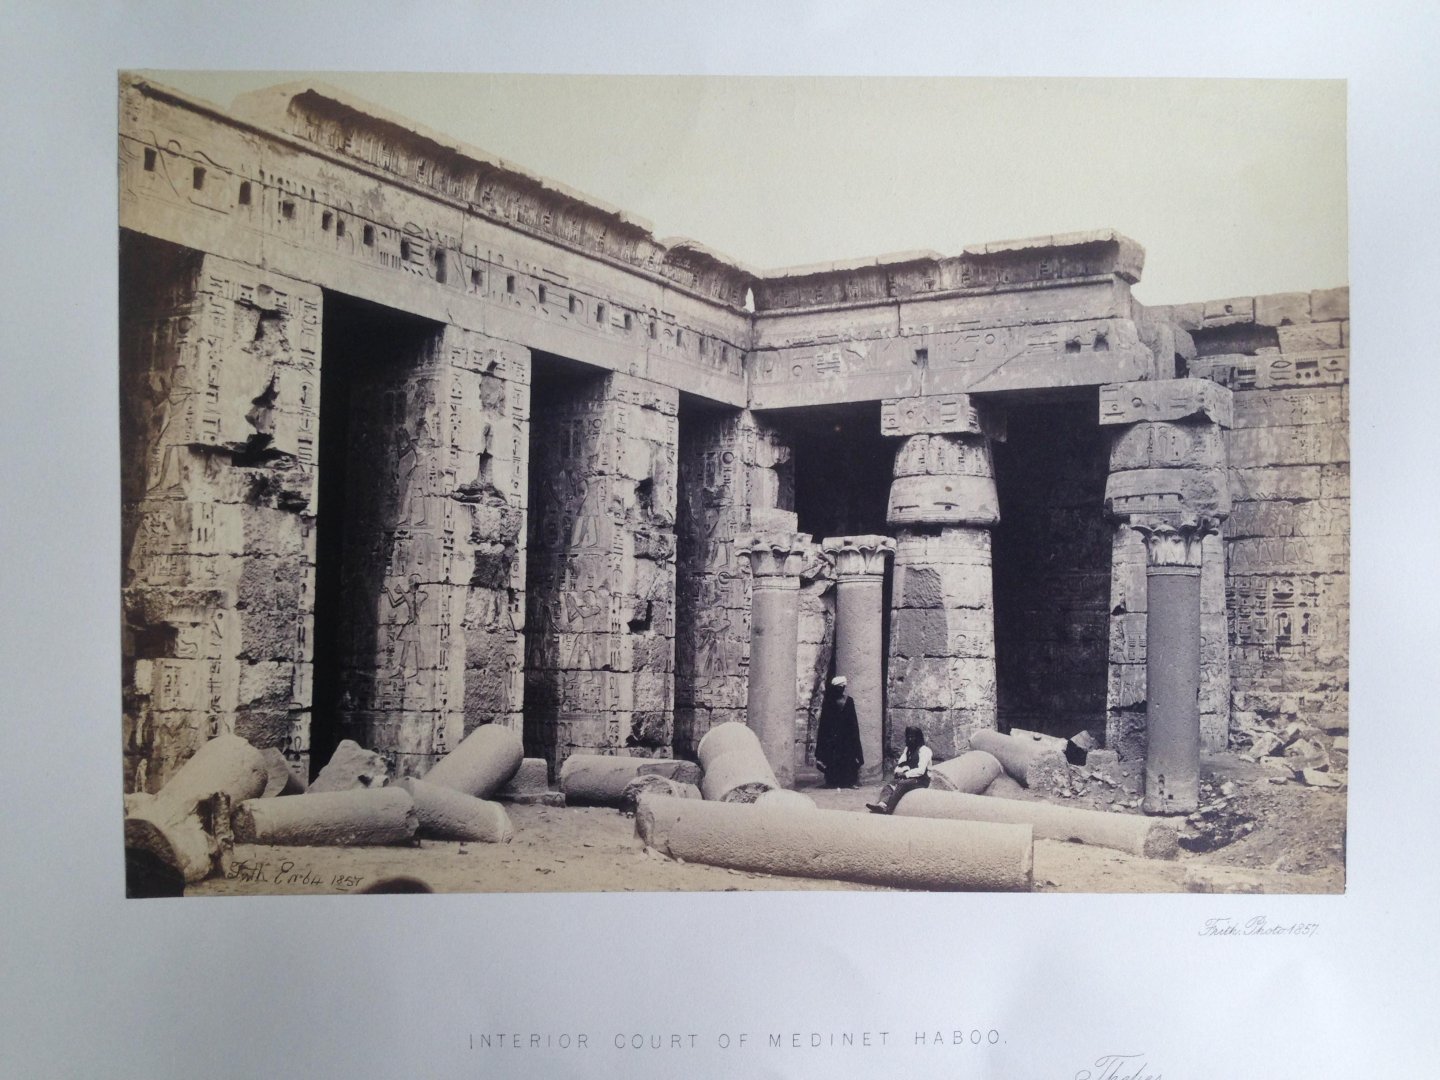 Frith, Francis - Interior Court of Medinet Haboo, Thebes, Series Egypt and Palestine